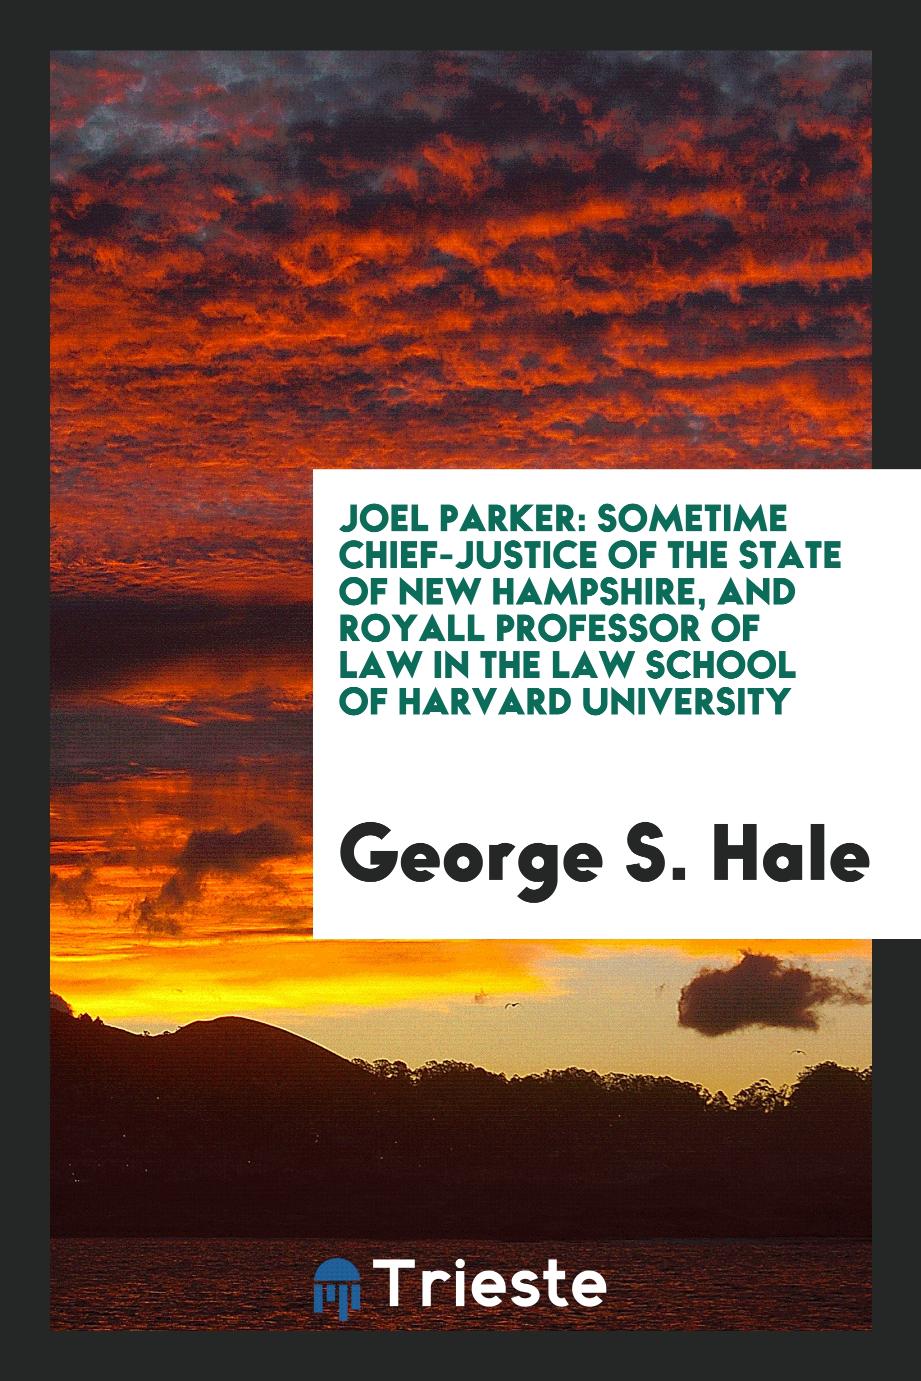 Joel Parker: sometime chief-justice of the state of New Hampshire, and Royall Professor of Law in the Law School of Harvard University